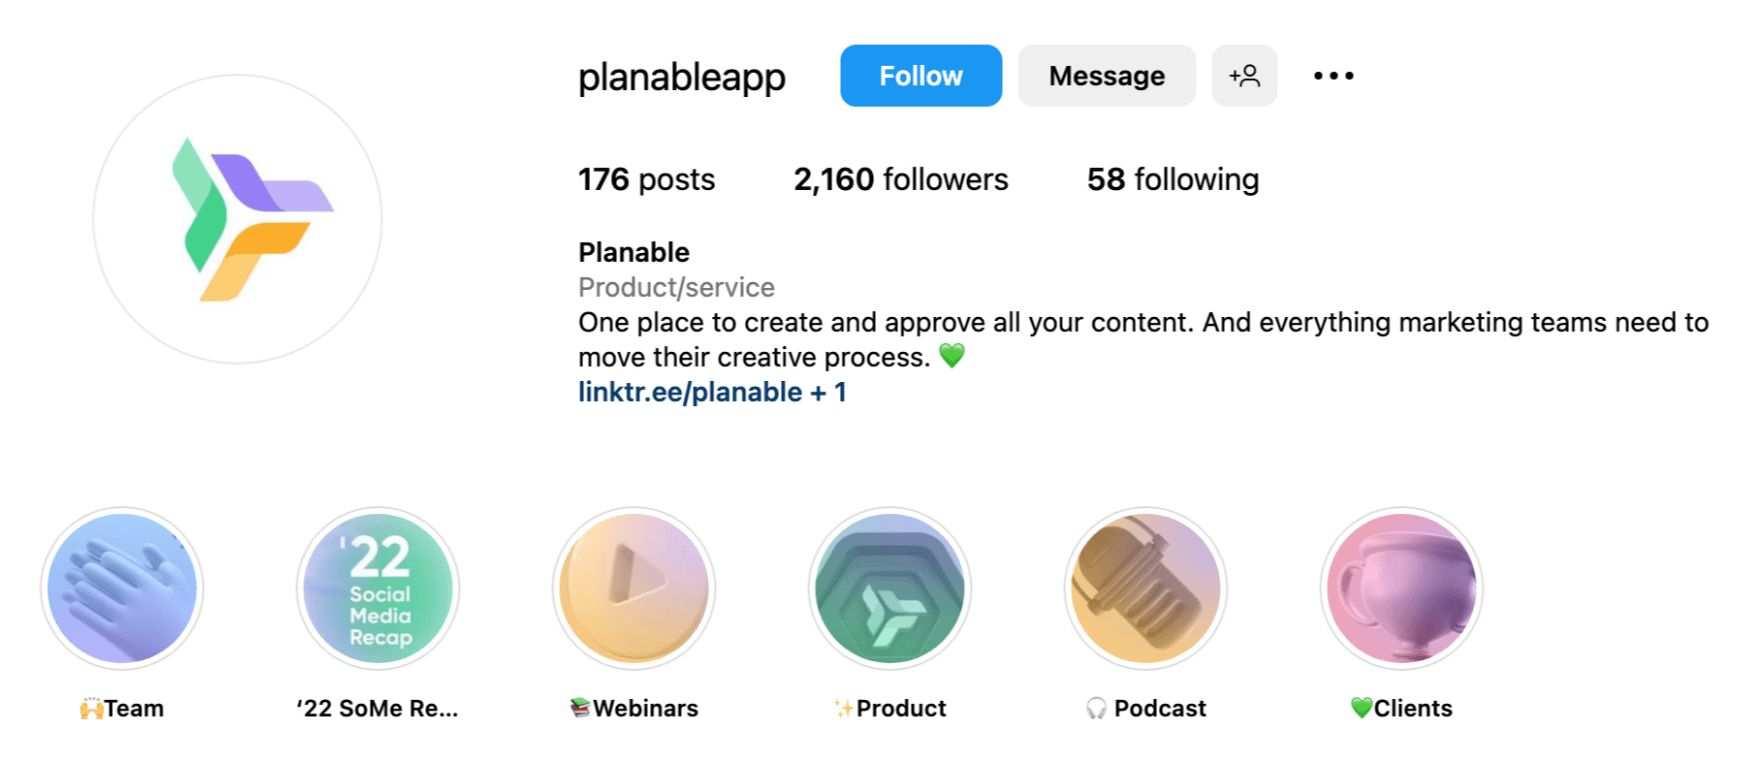 planableapp Instagram profile audit including number of posts, followers, following and product description